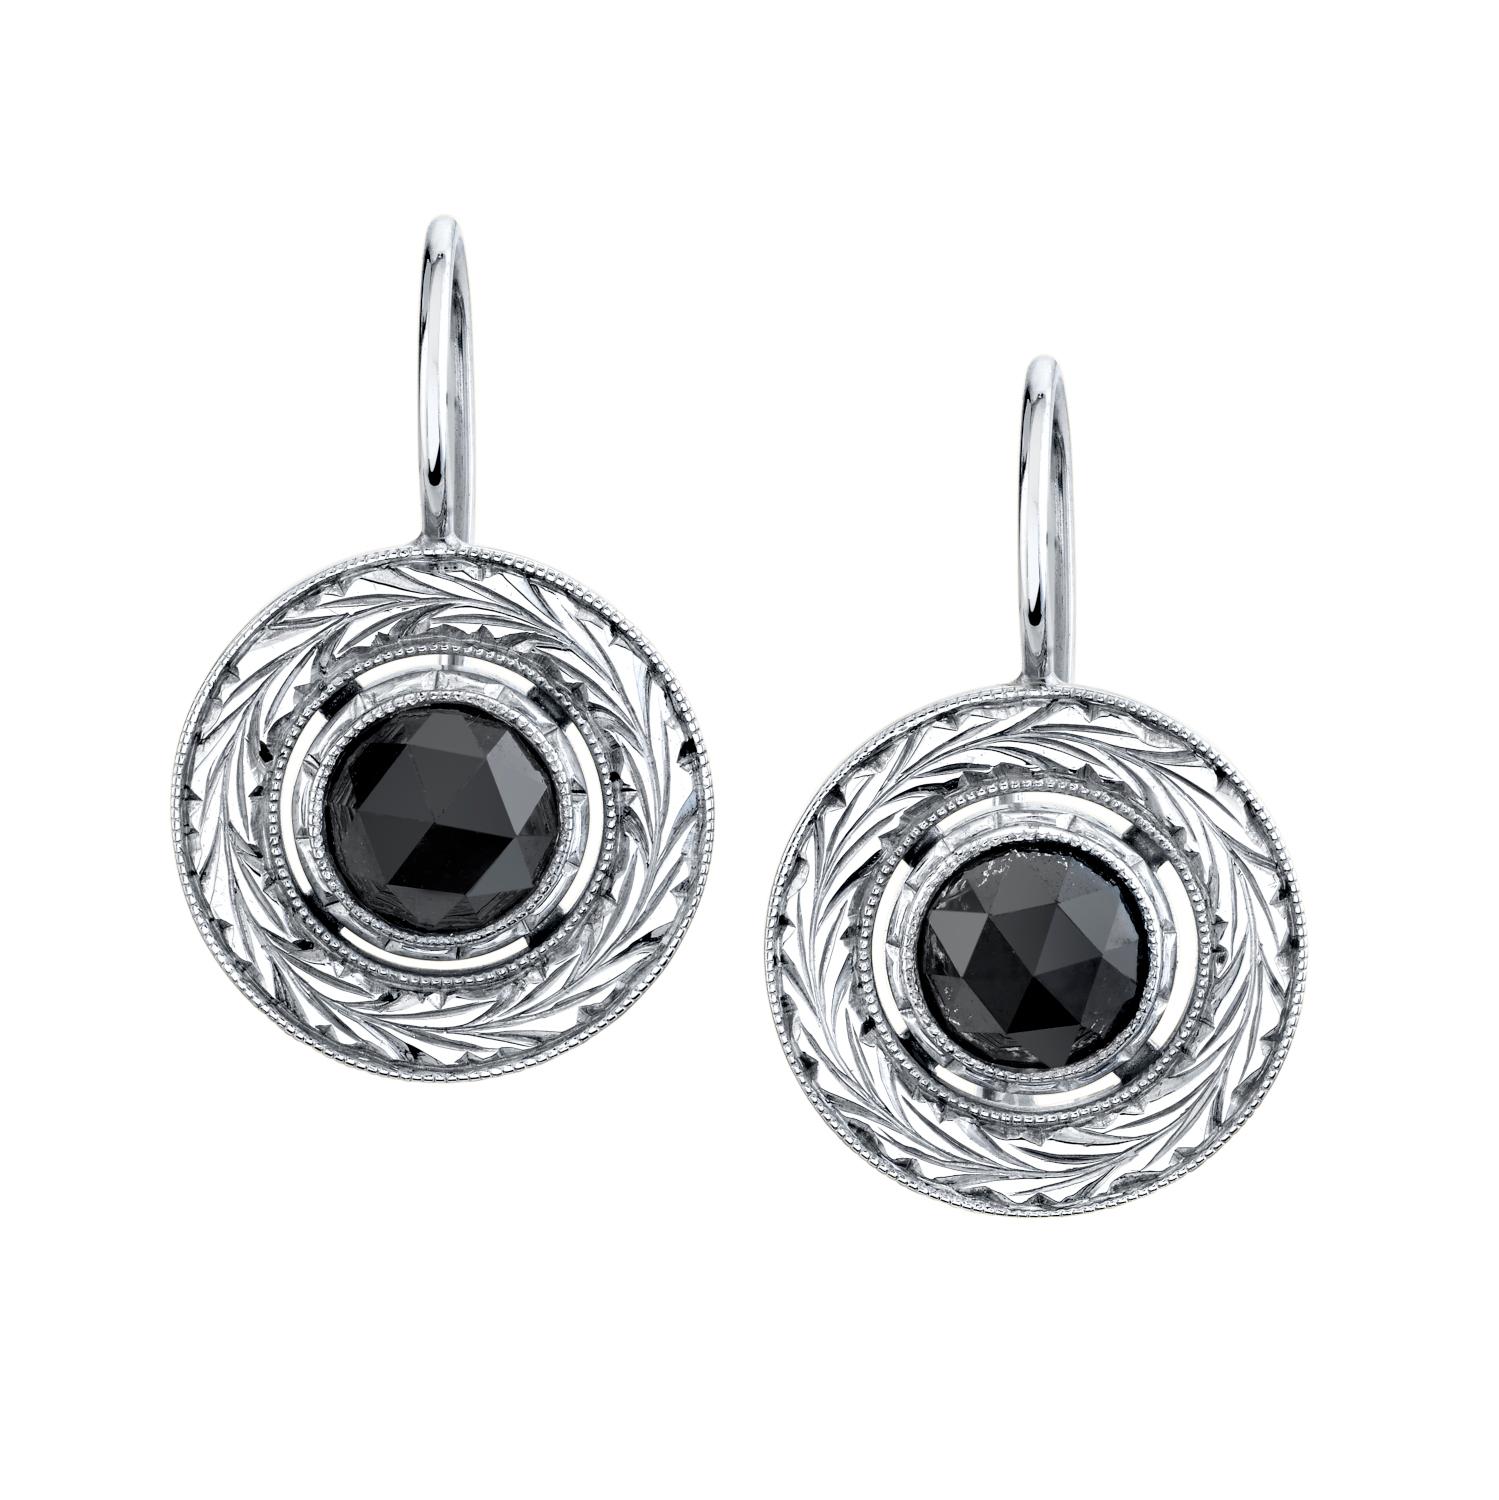 Rough and refined! Black diamonds and white gold are not necessarily a black tie affair! These drop earrings can be worn casually, even though they sport a large, over one carat diamond in each earring for a total weight of 2.42 carats. The diamonds